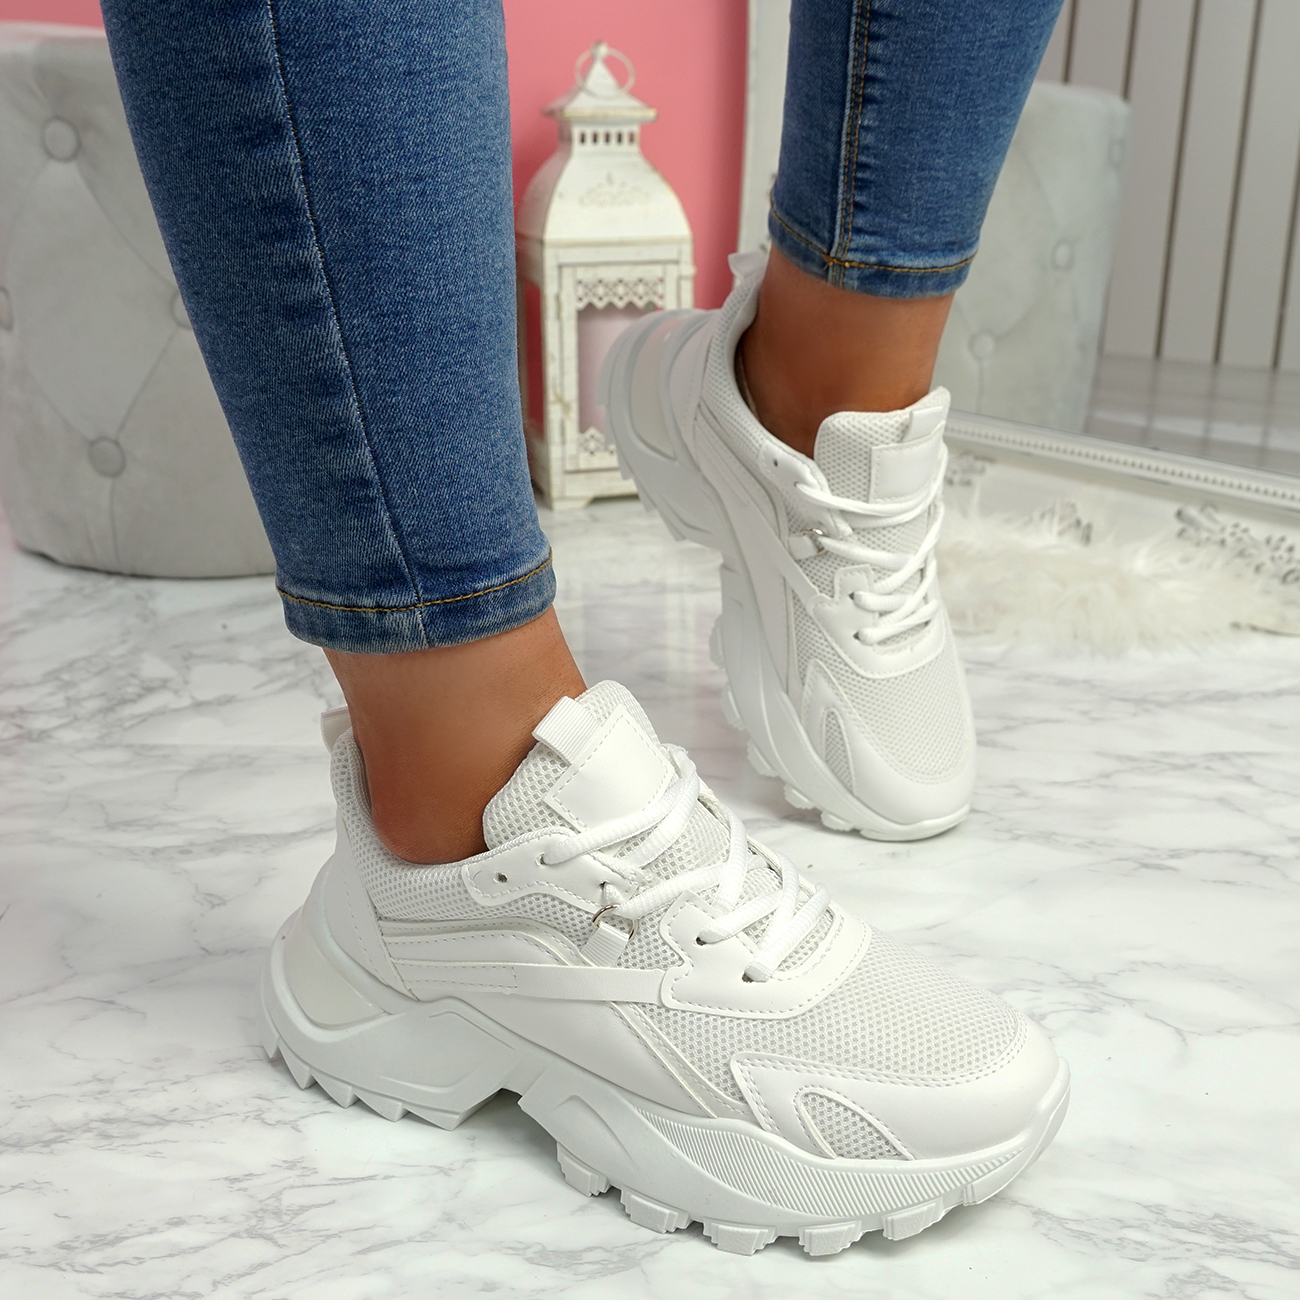 WOMENS LADIES CHUNKY TRAINERS PARTY SNEAKERS LACE UP HEEL WOMEN SHOES ...